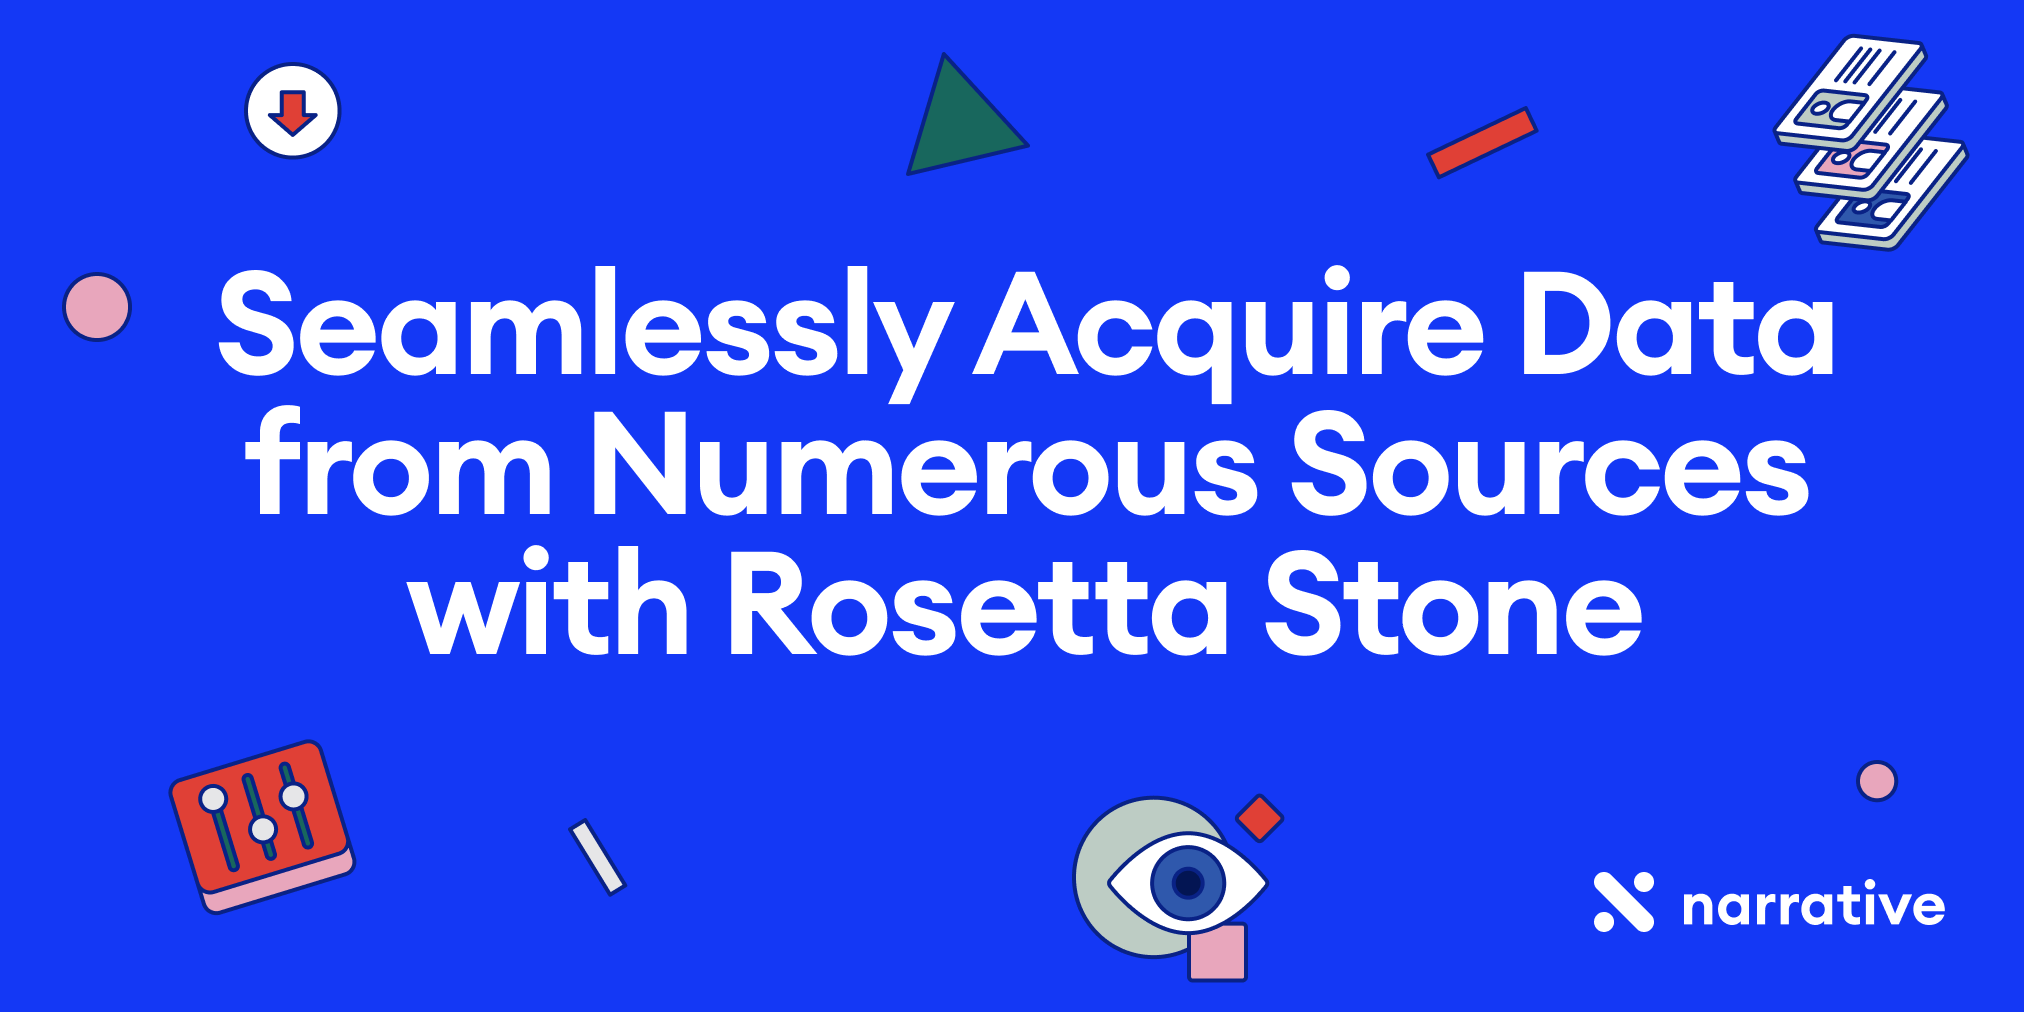 Seamlessly Acquire Data from Numerous Sources with Rosetta Stone